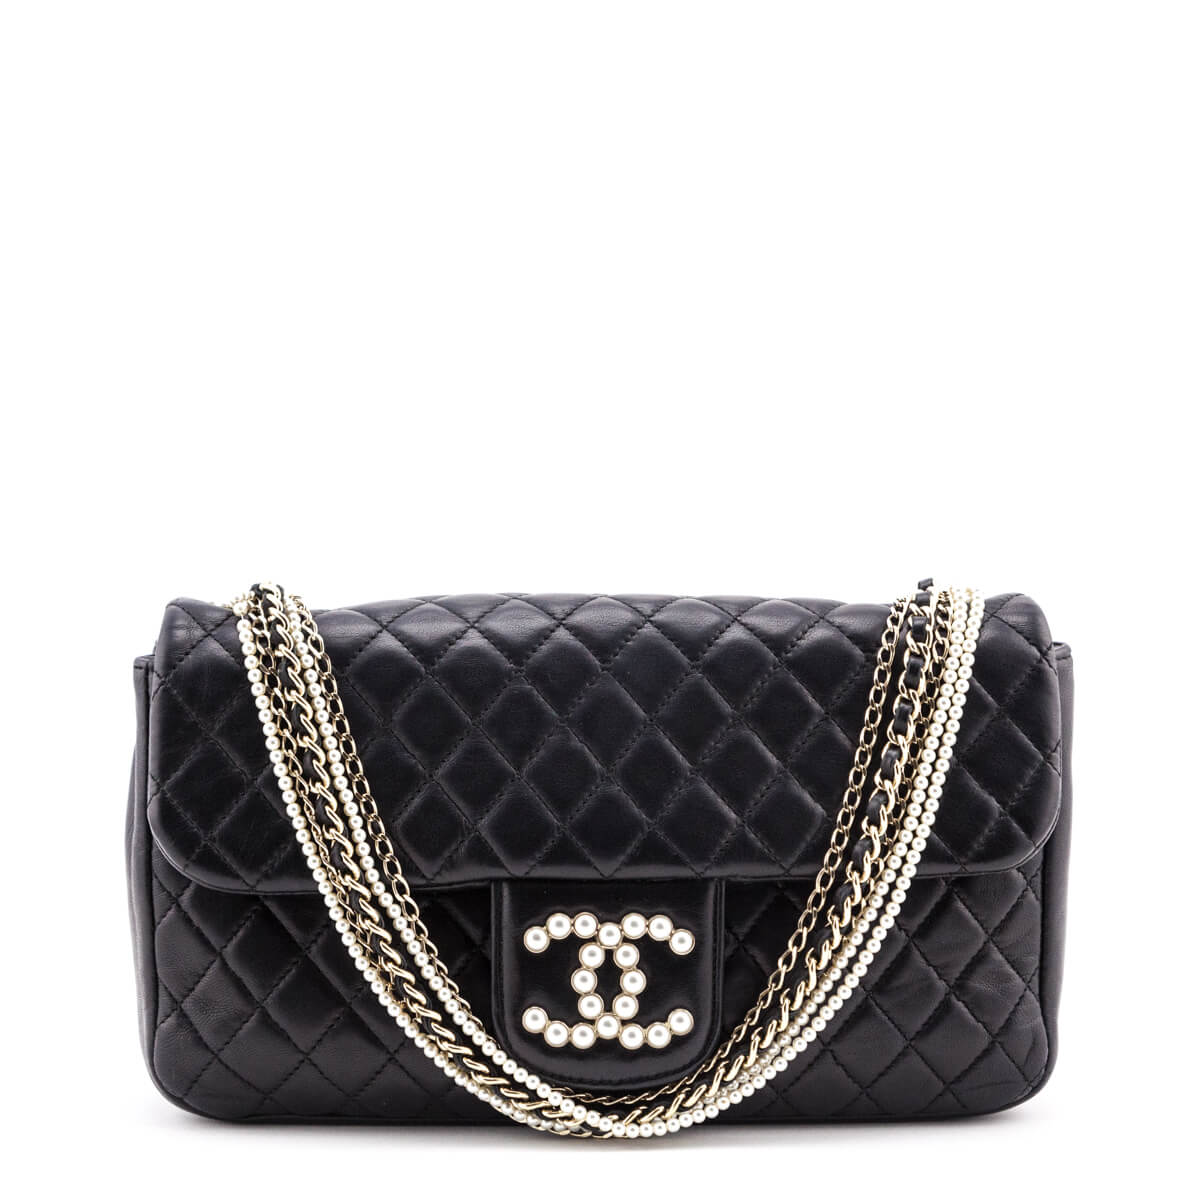 Chanel Black Quilted Lambskin Medium Westminster Flap Bag - Chanel